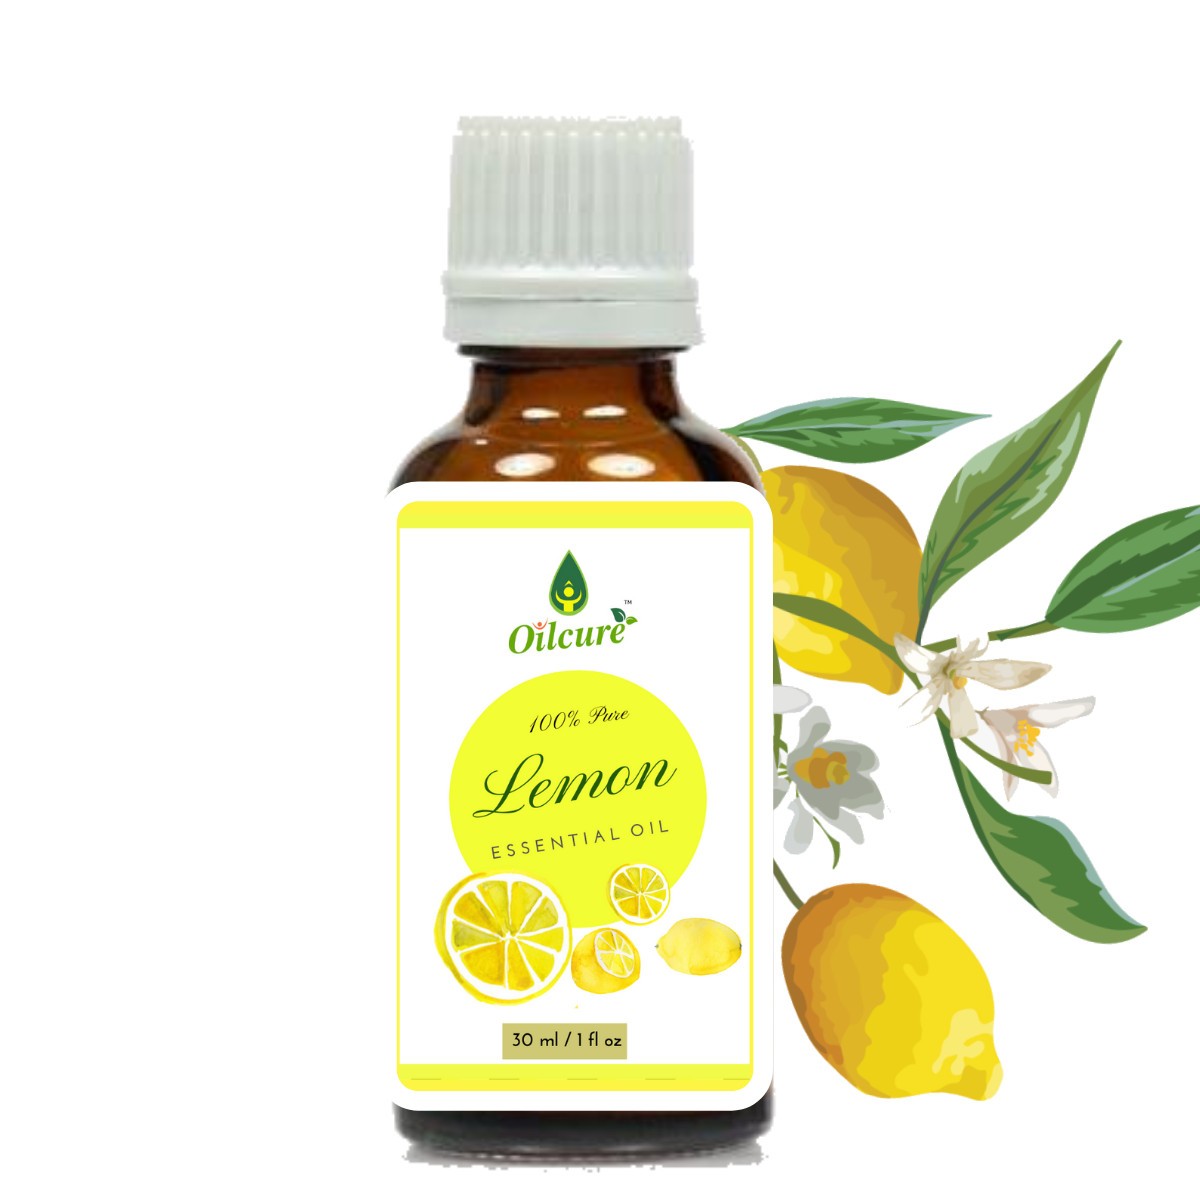 Lemon oil is widely used in aromatherapy due to its invigorating and refreshing scent. Inhaling its aroma can help uplift the mood, reduce stress, and promote mental clarity.